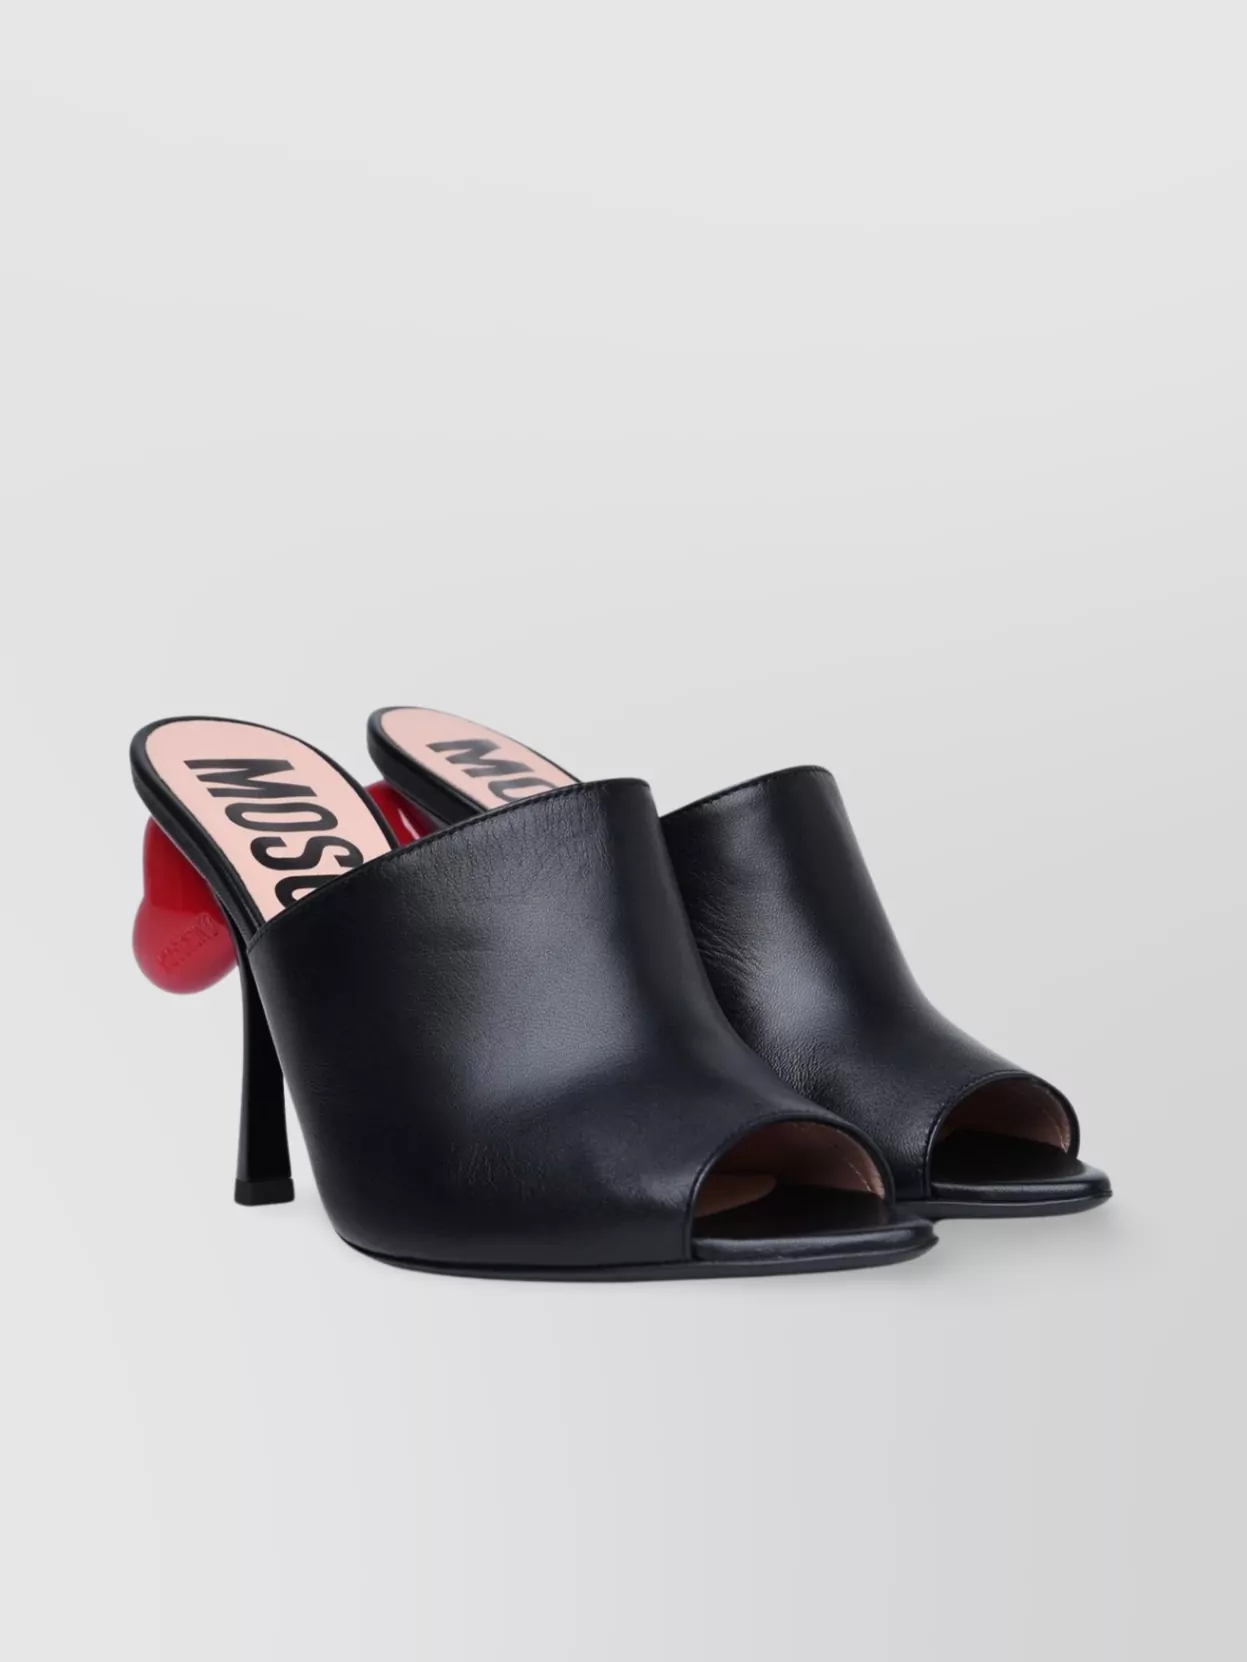 Moschino Leather Sandals Heart-shaped Heel In Black